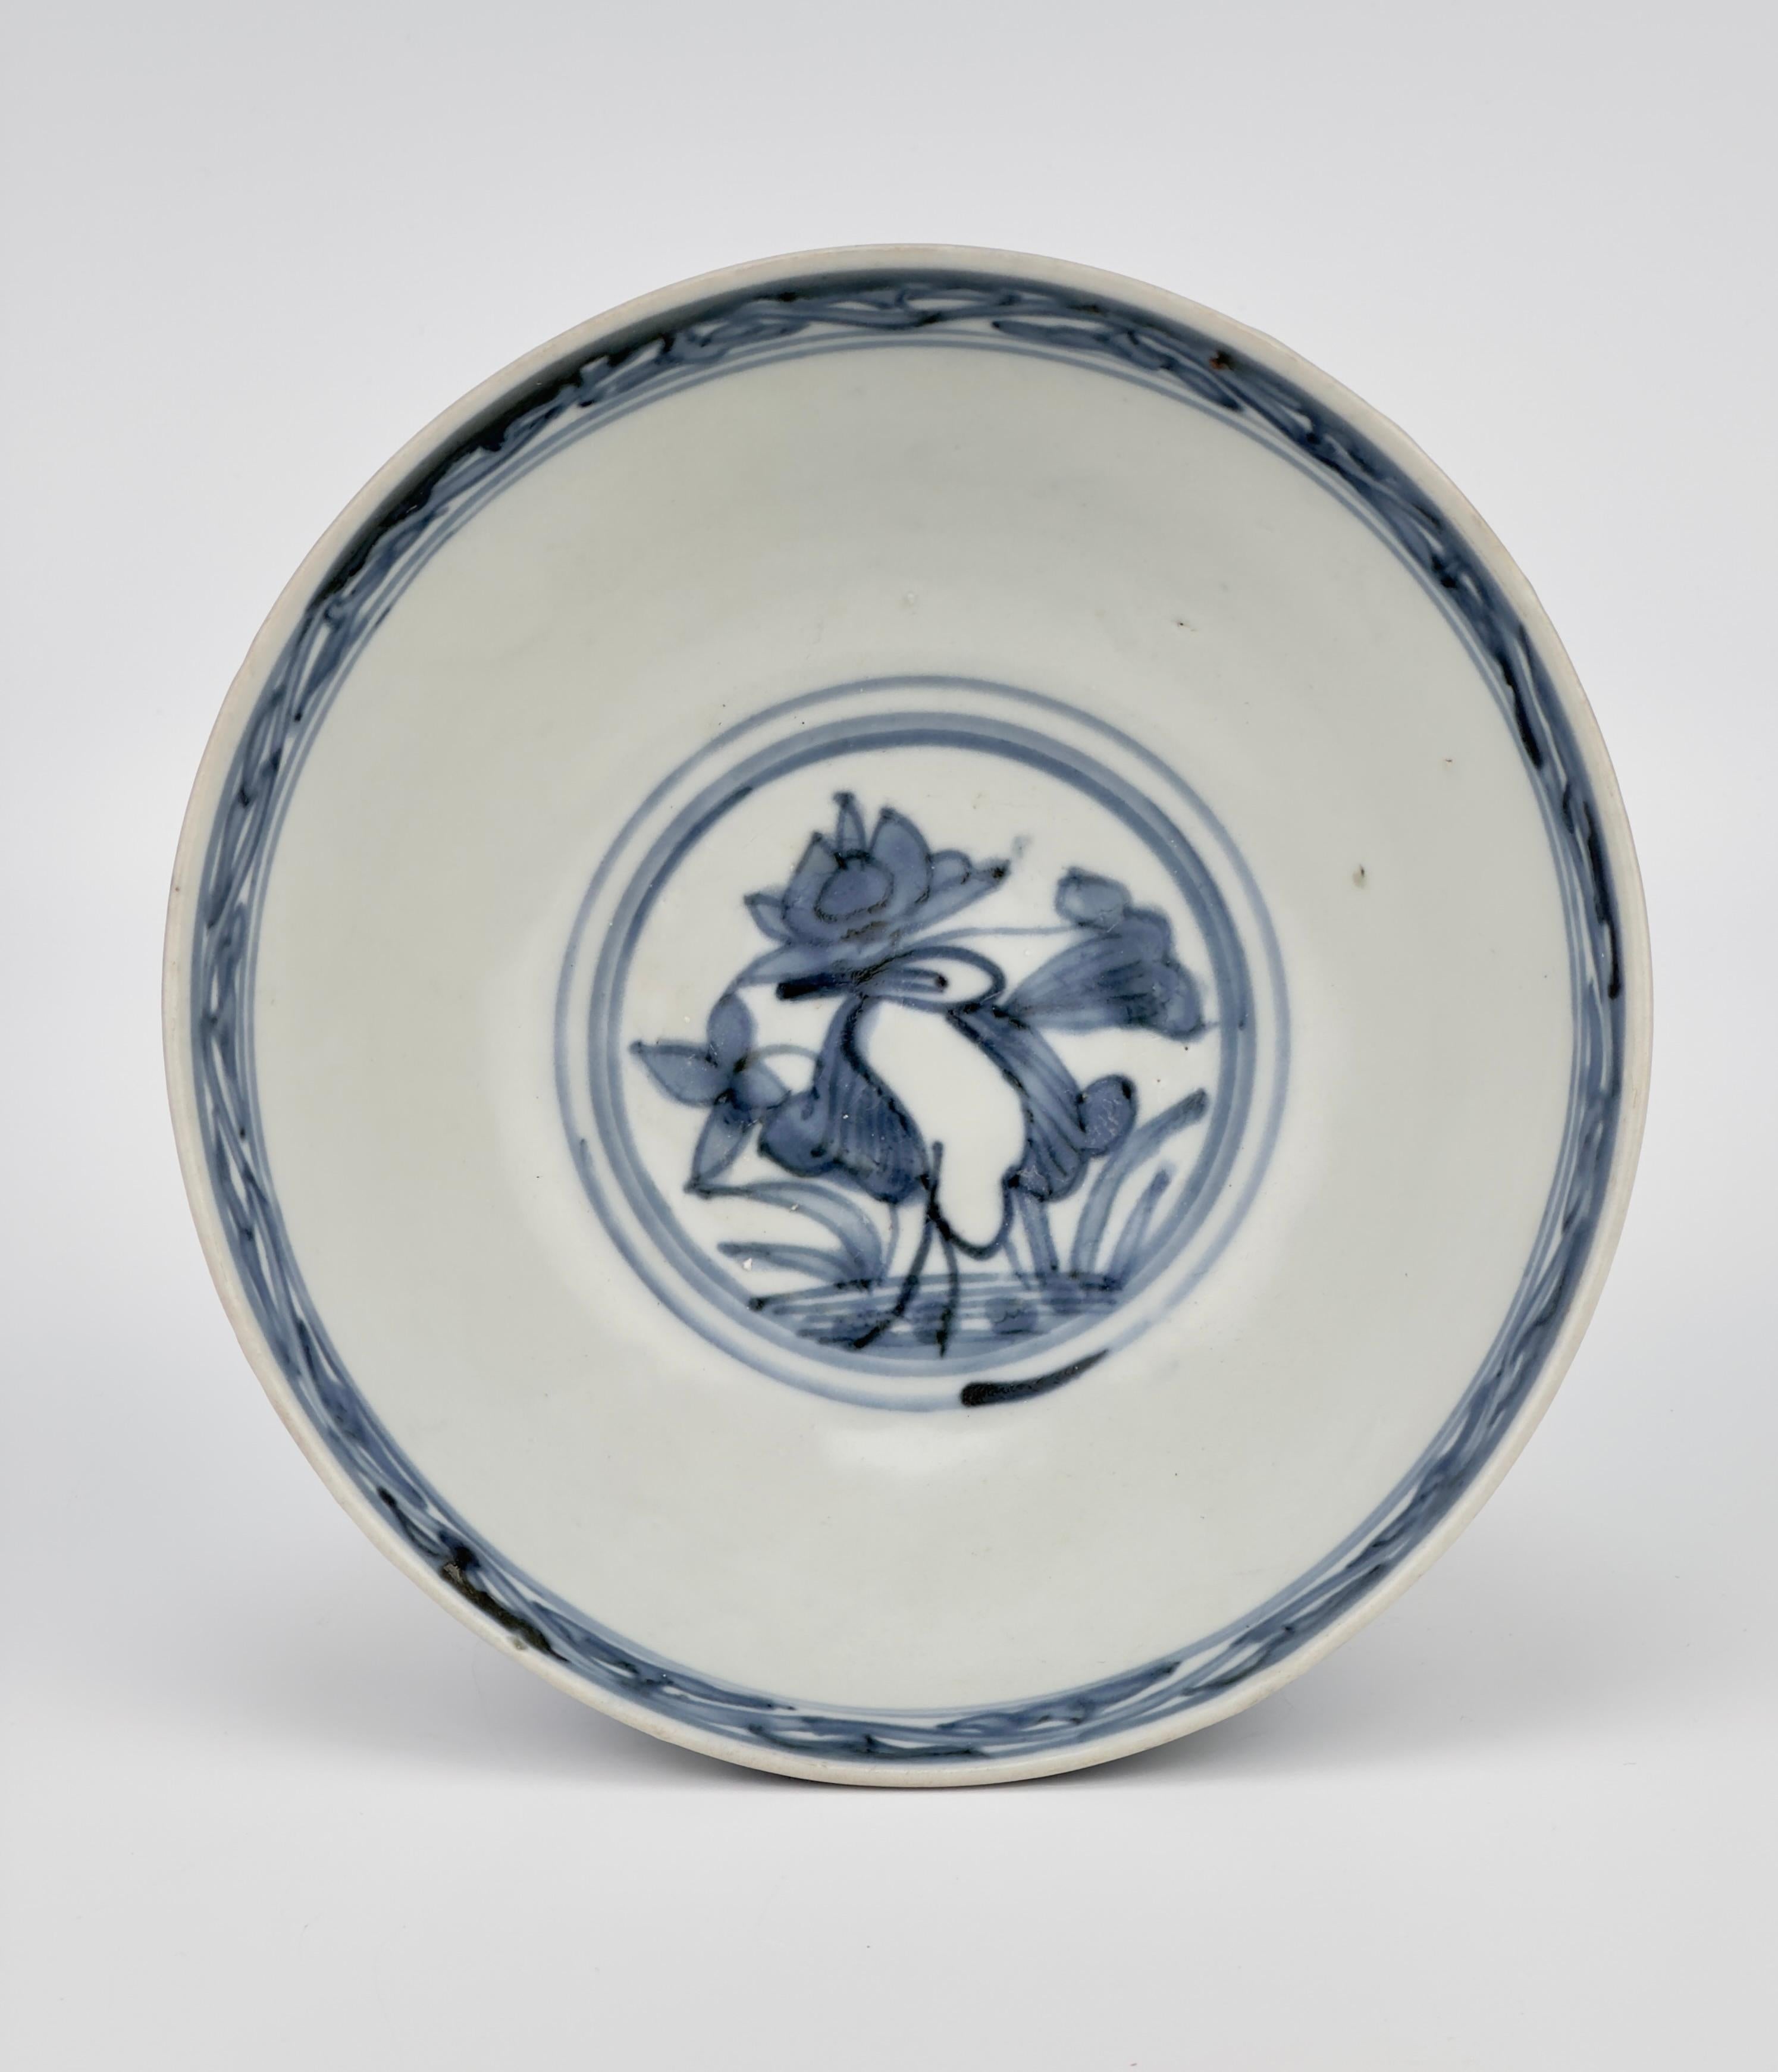 18th Century and Earlier Bowl with mandarin duck and lotus pattern design, Late Ming Era(16-17th century) For Sale